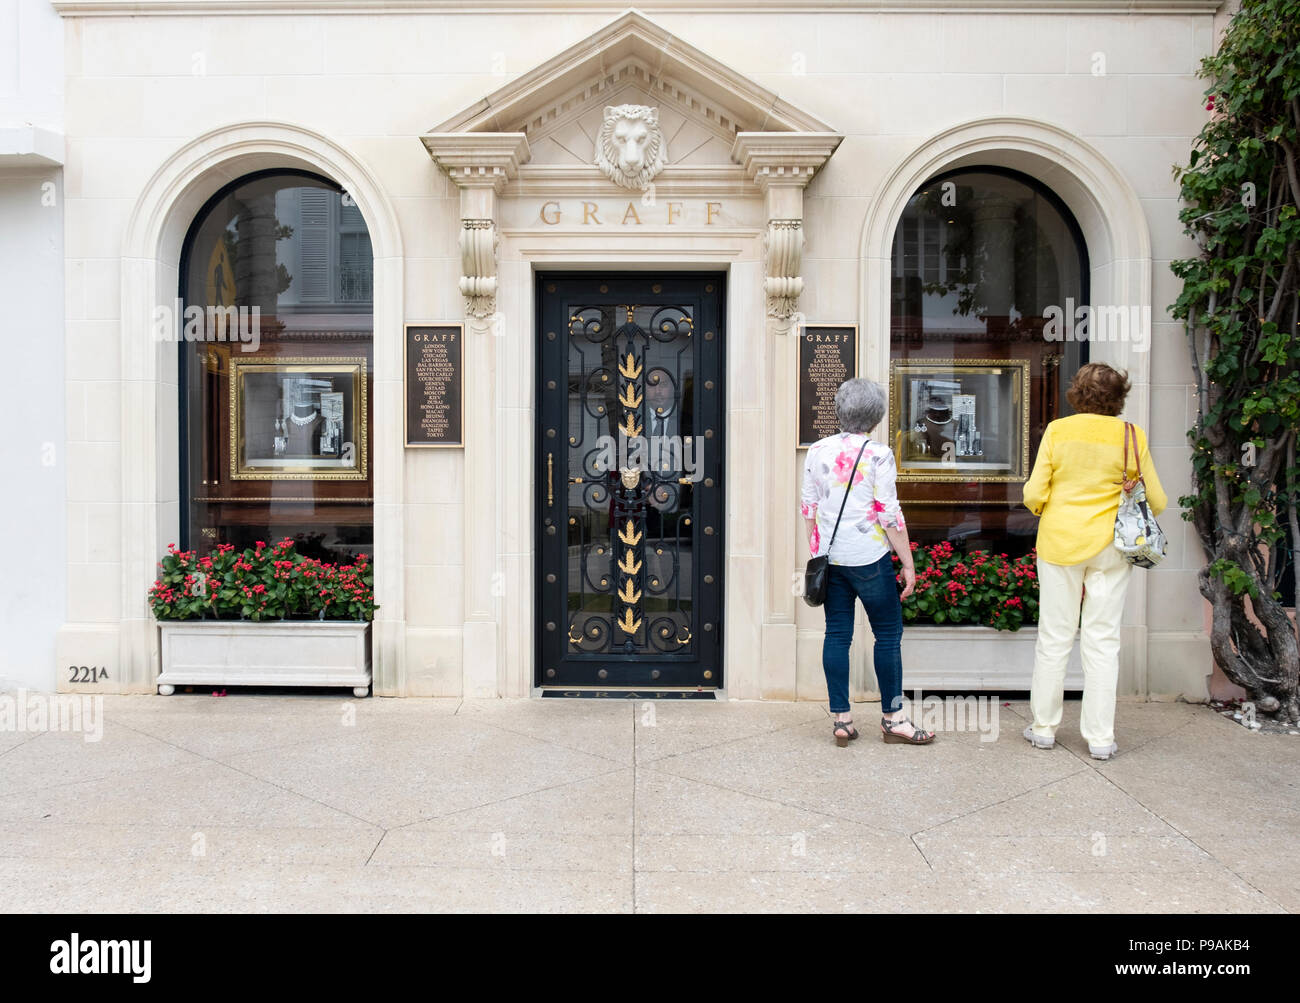 The exterior and entrance to Graff, a high end jewelry store on Worth Ave. in Palm Beach, Fl.. A security man stands in the doorway & two women browse Stock Photo